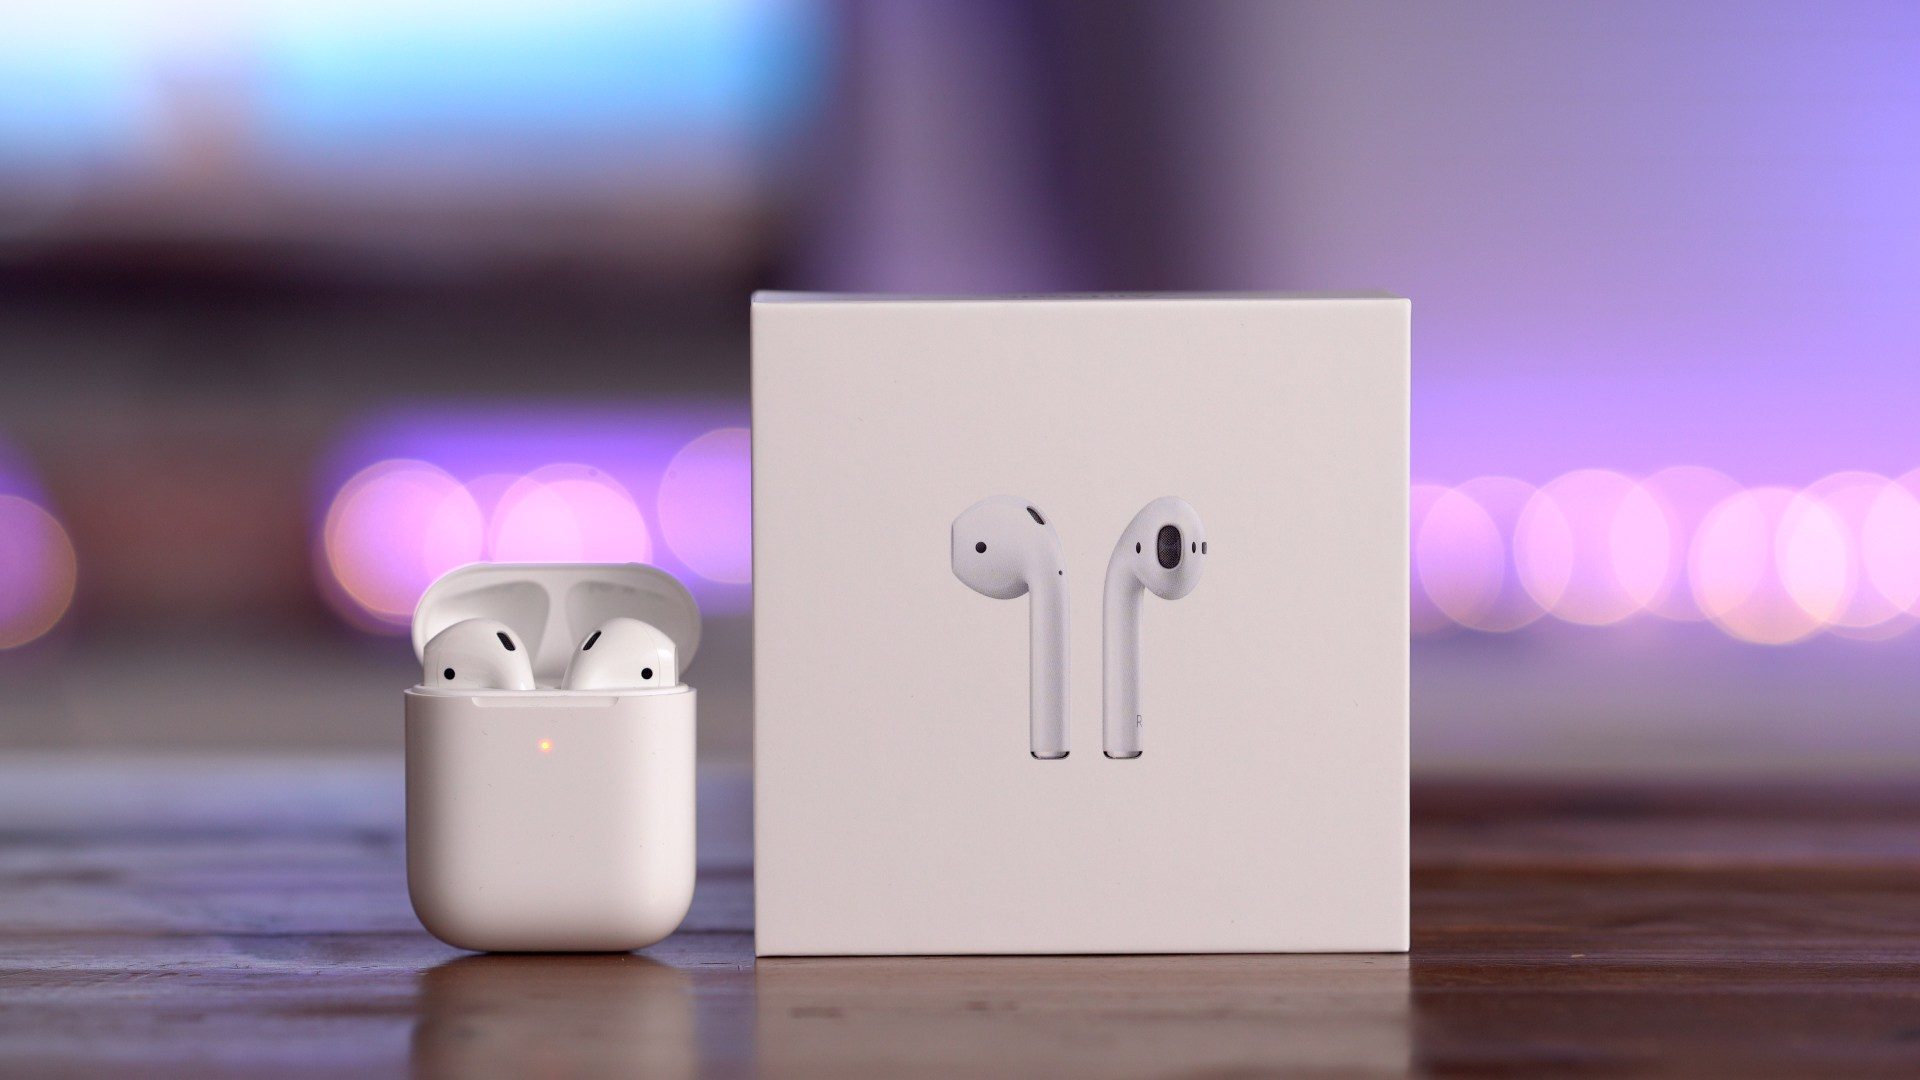 Apple&#39;s new AirPods see first price drop from $140 - 9to5Toys